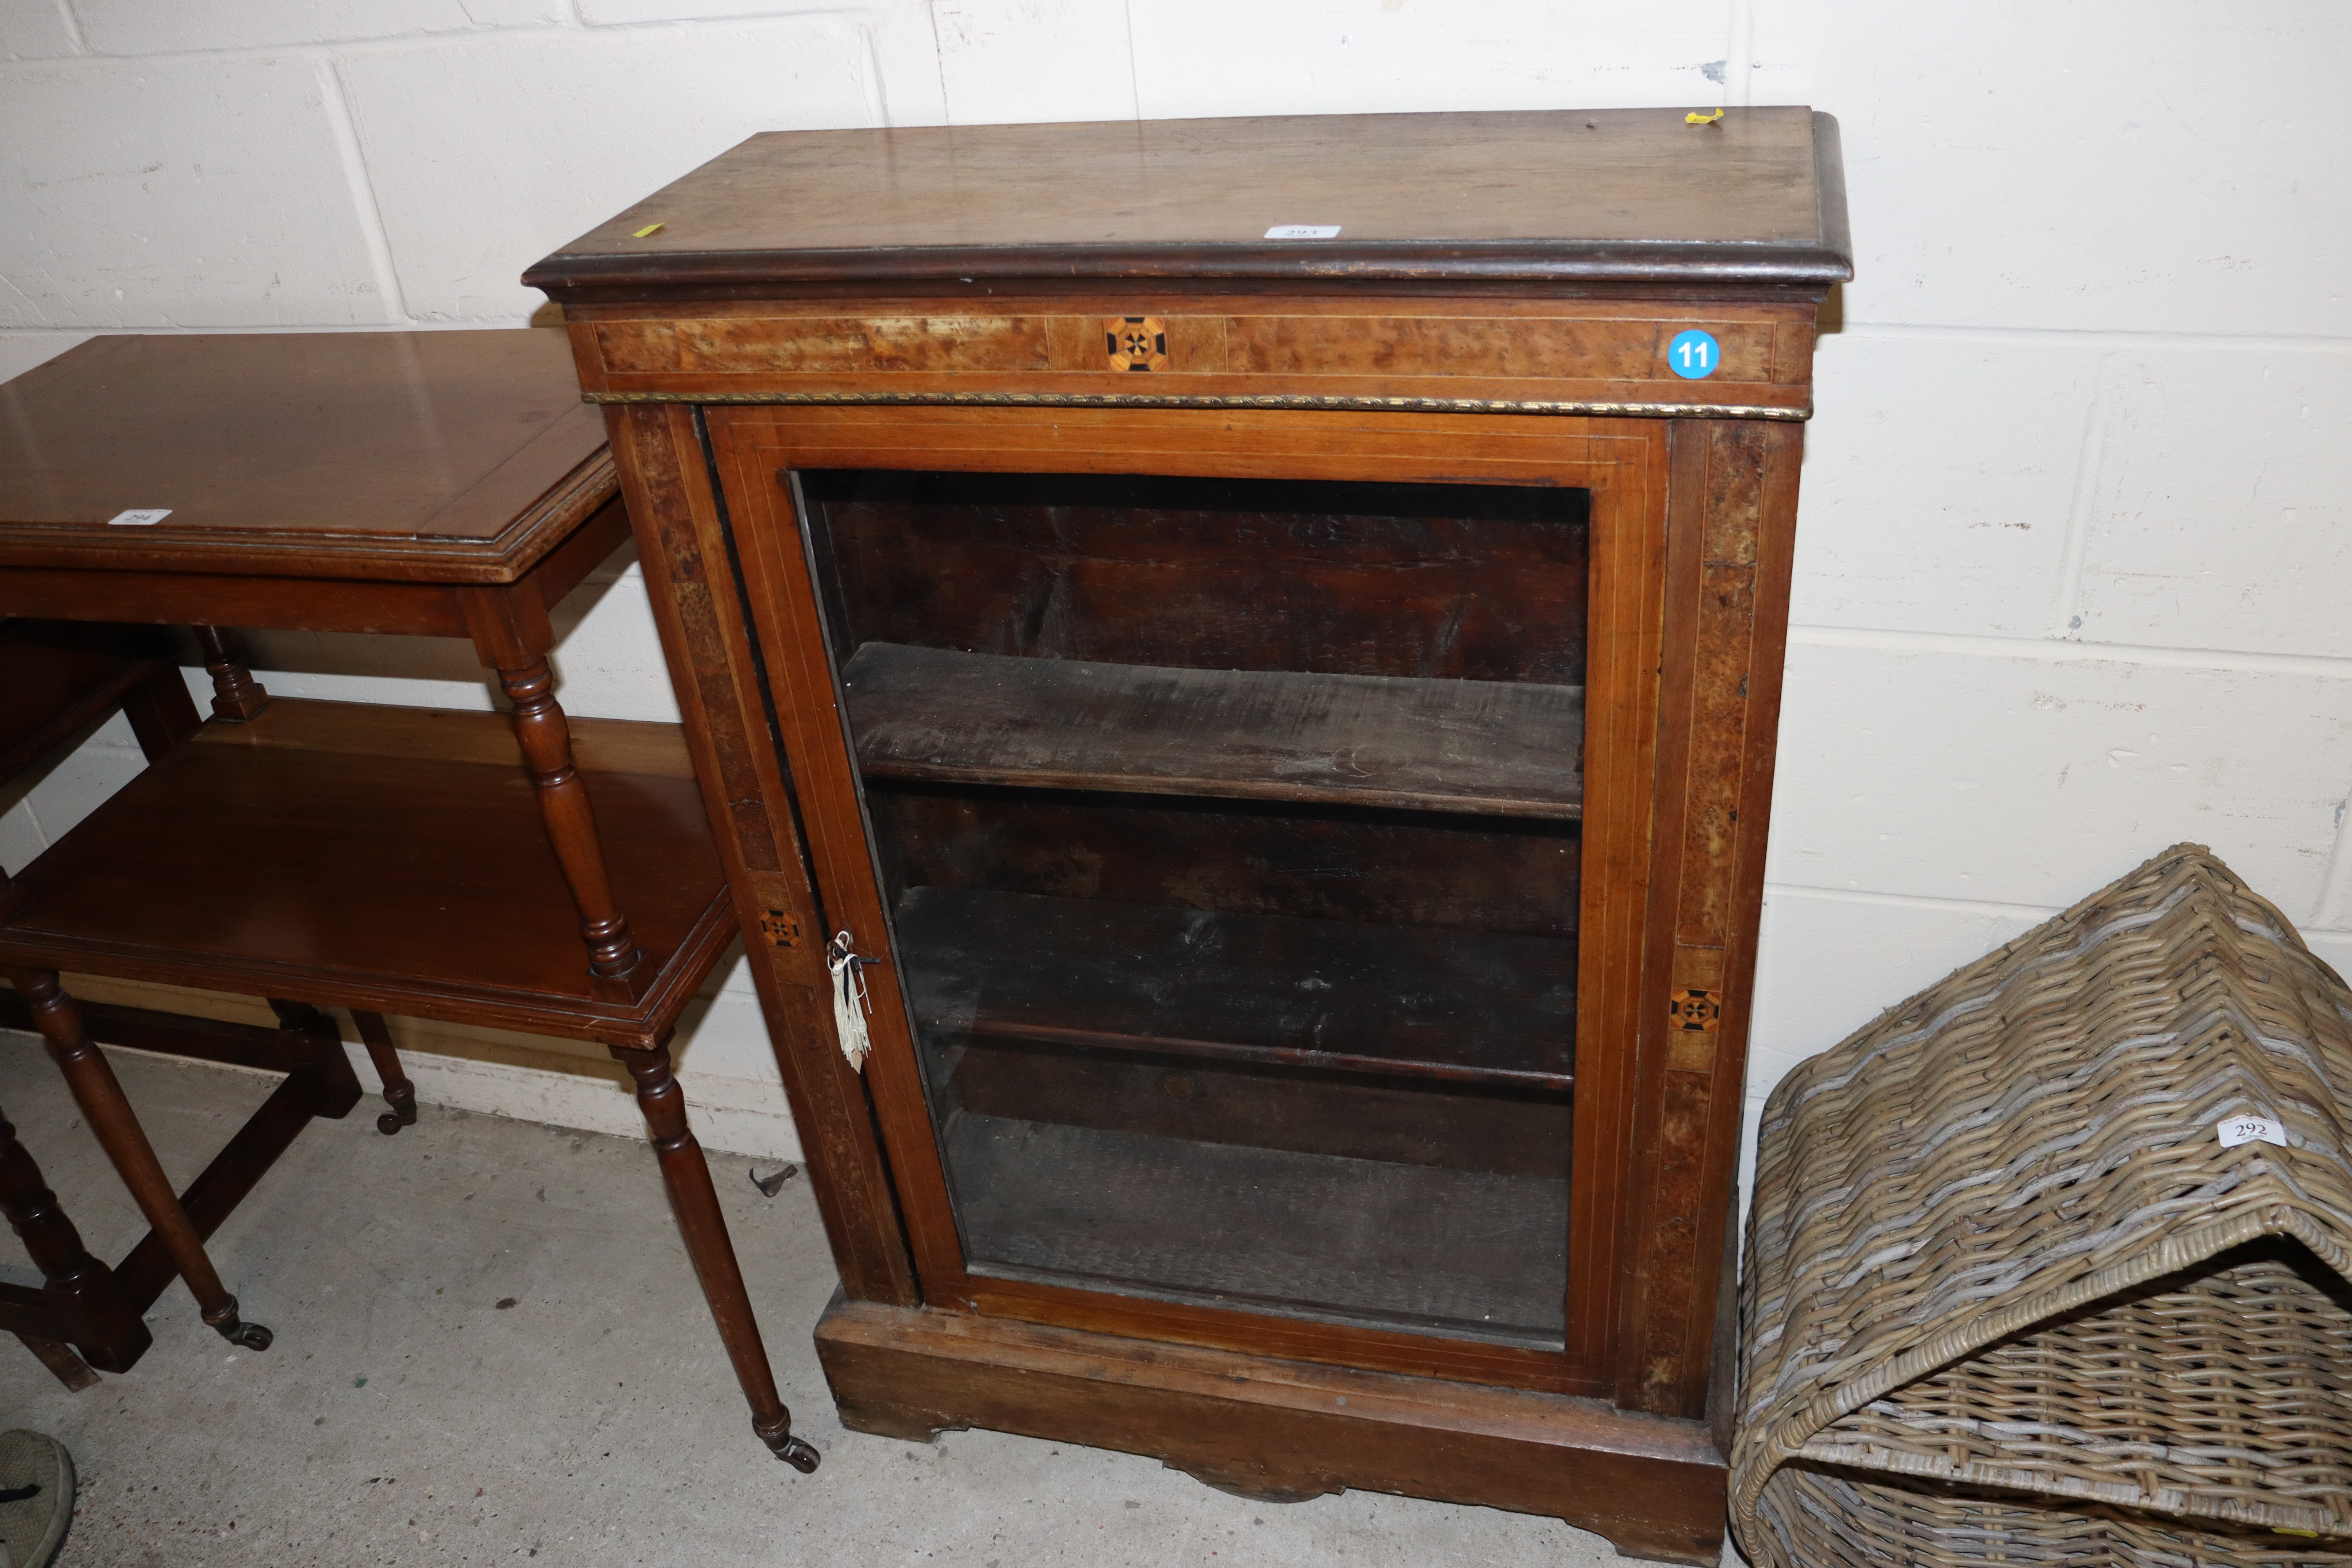 A late Victorian walnut pier cabinet with bur wood and box strung inlay